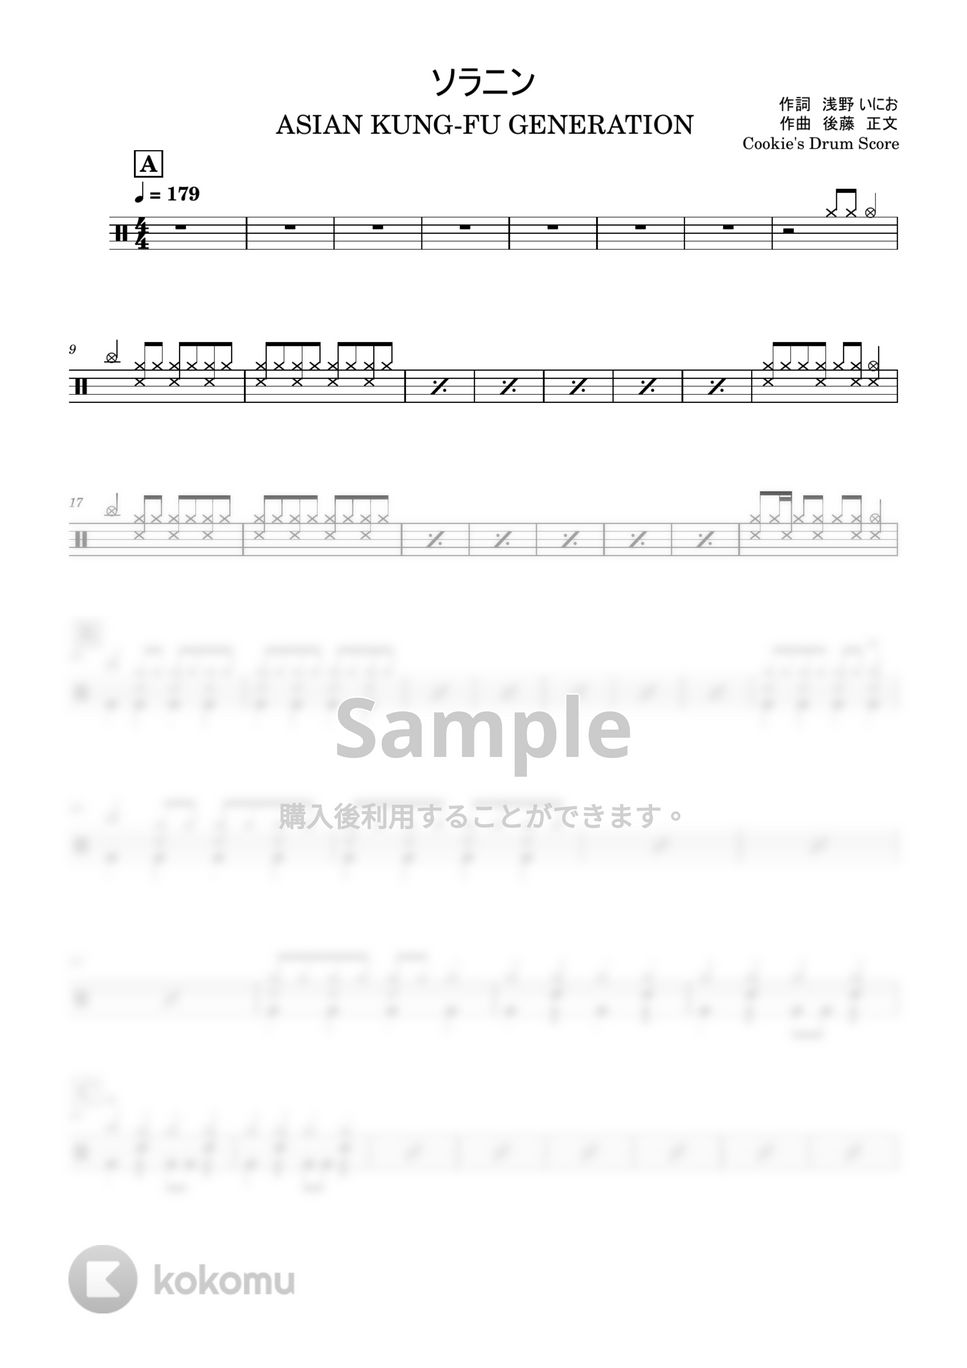 ASIAN KUNG-FU GENERATION - ソラニン by Cookie's Drum Score